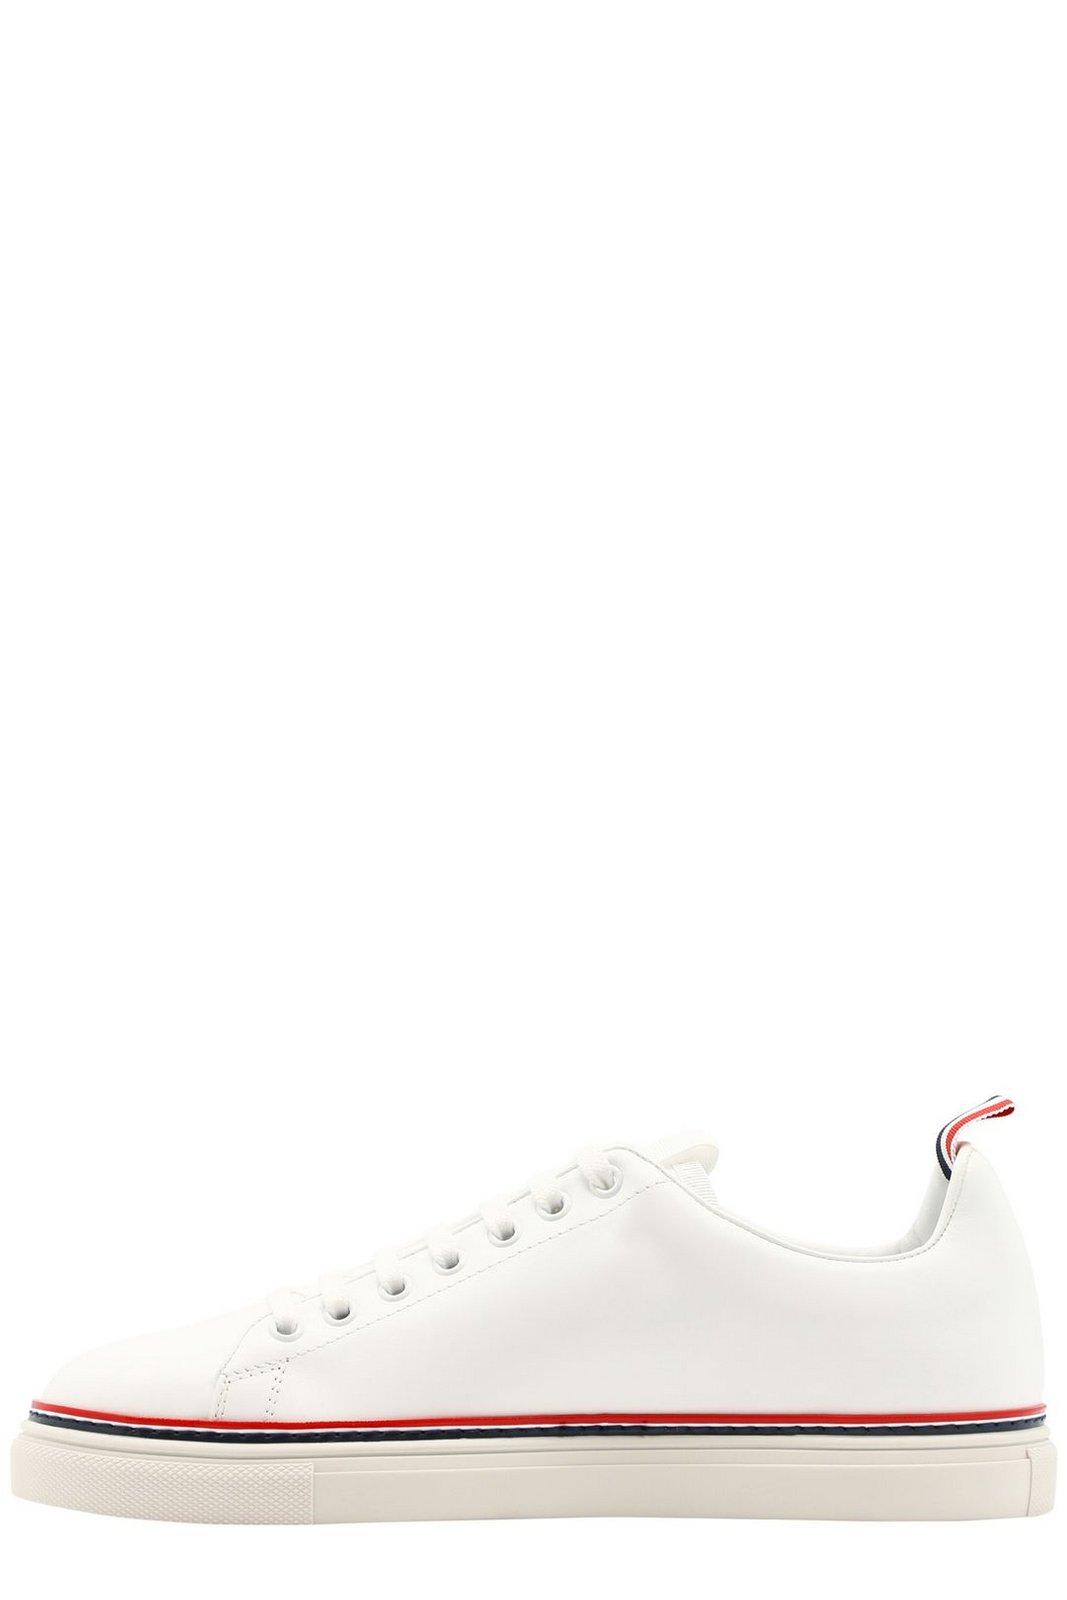 Thom Browne Heritage Lace-up Sneakers